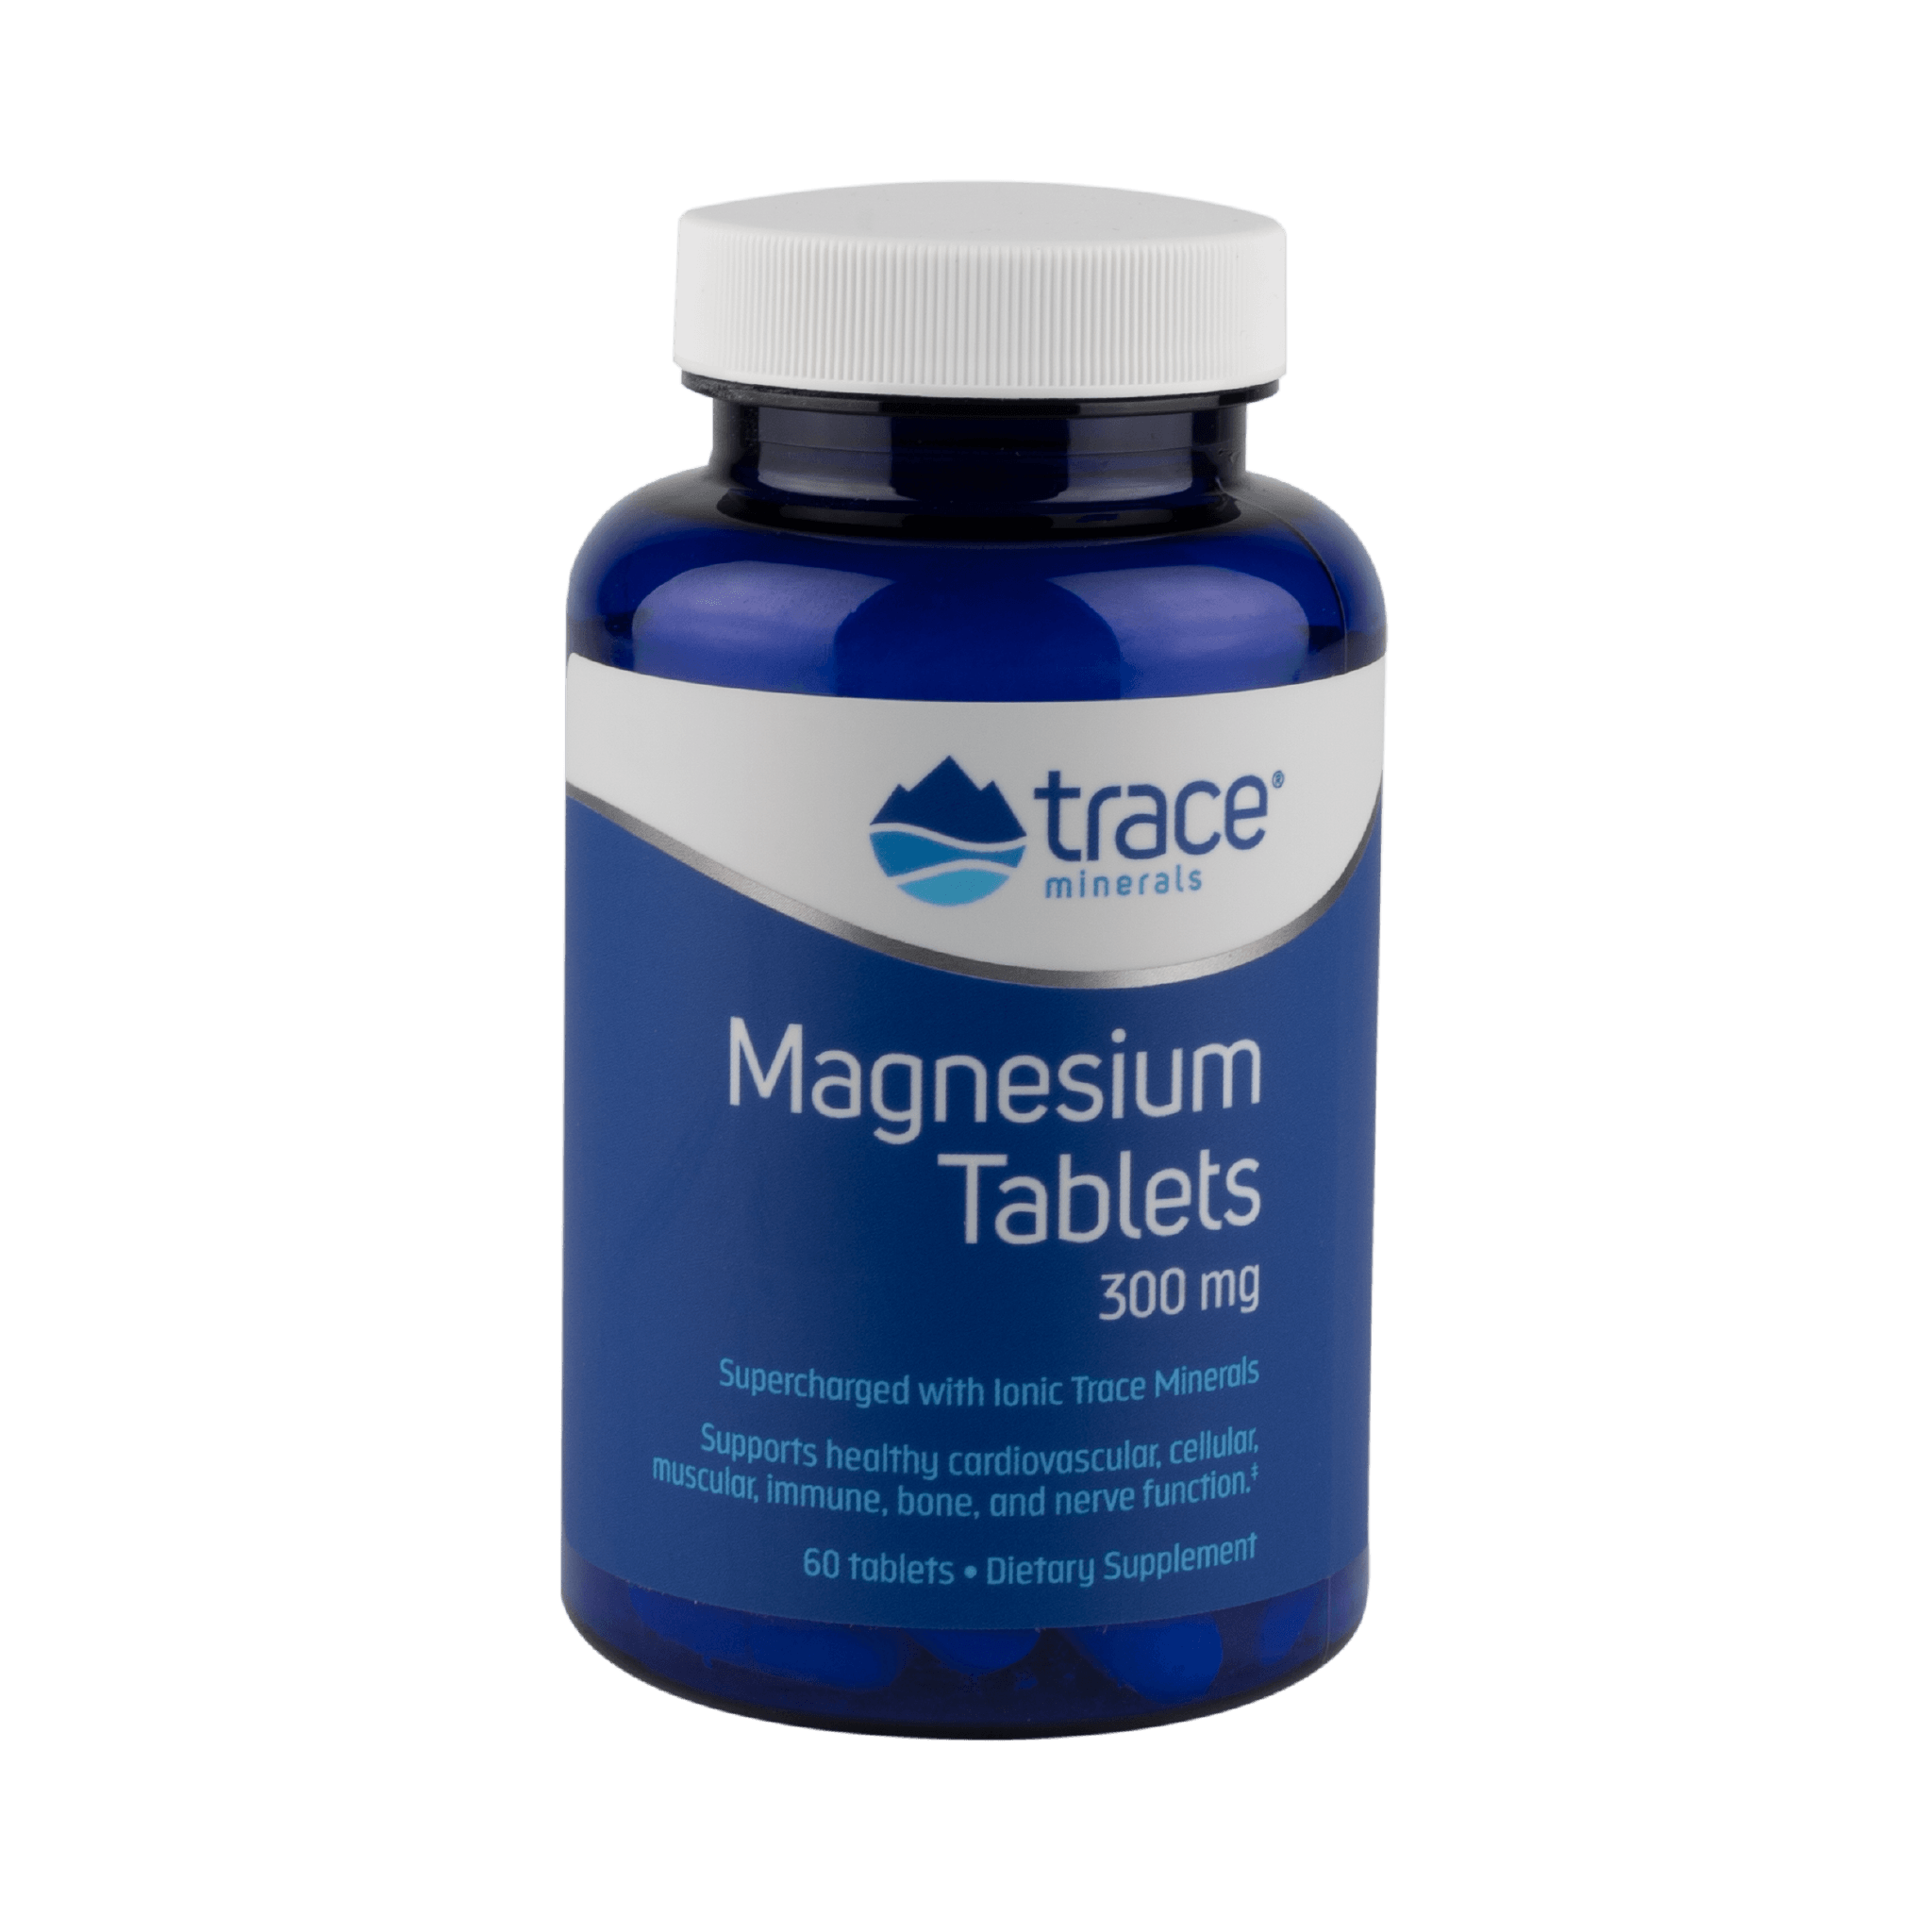 Magnesium Tablets - Trace Minerals